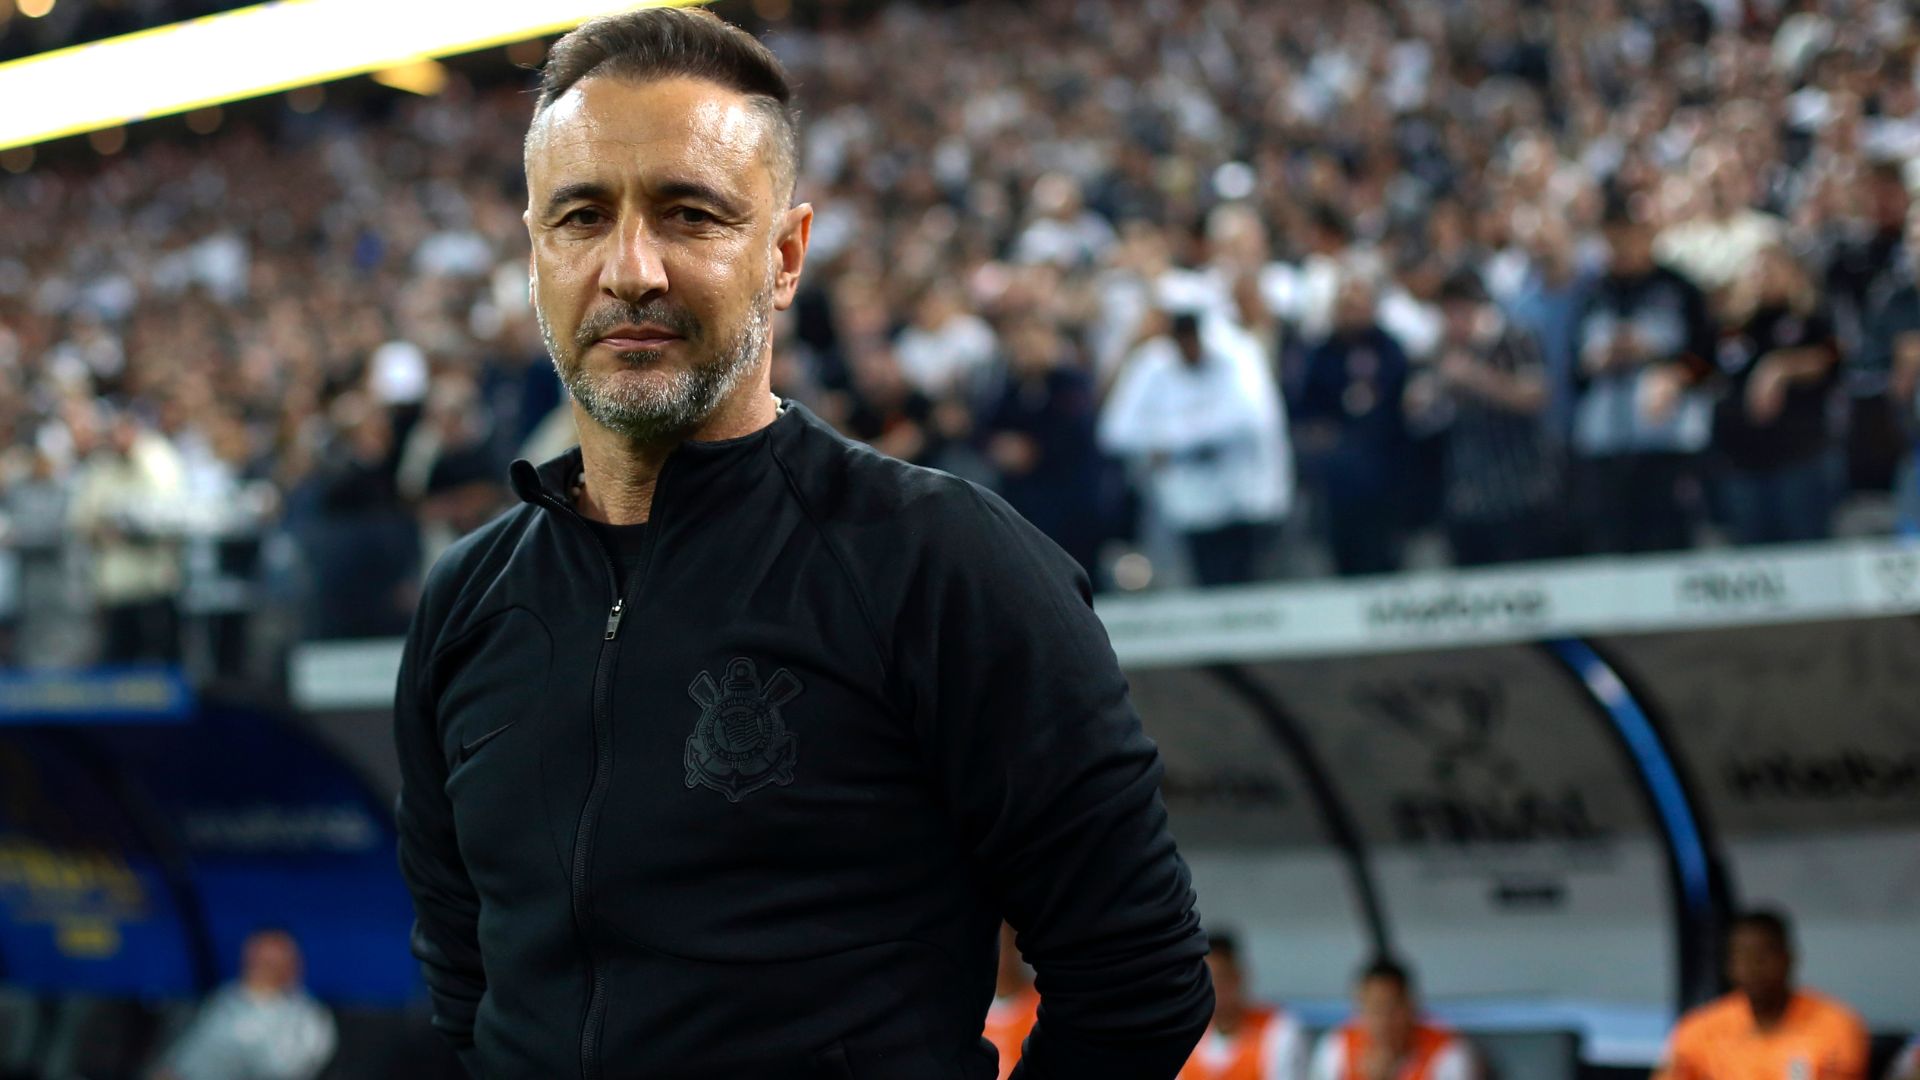 Vítor Pereira was ahead of Corinthians, in 2022 (Credit: Getty Images)